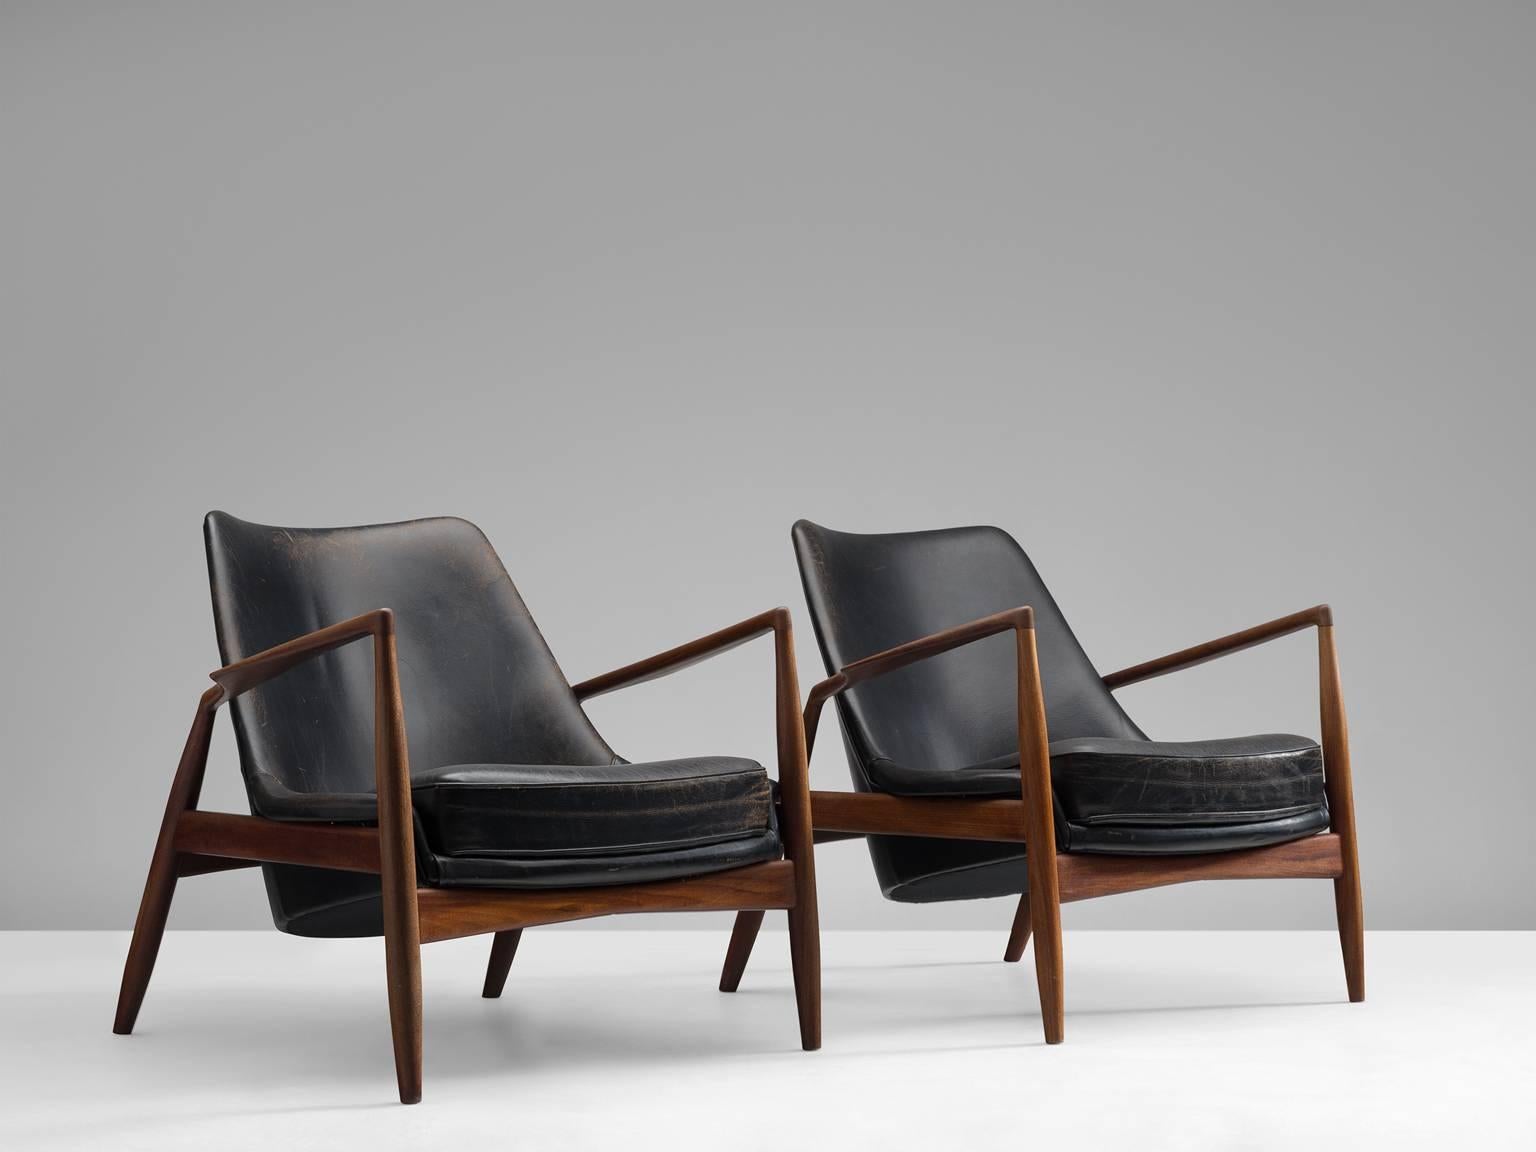 Set of two 'Seal' lounge chairs model 503-799, in teak and leather, by Ib Kofod-Larsen for OPE, Sweden, 1956. 

Beautiful and iconic seal lounge chairs. The well-crafted frame of this chair is made of a dark colored teak. It shows very nice